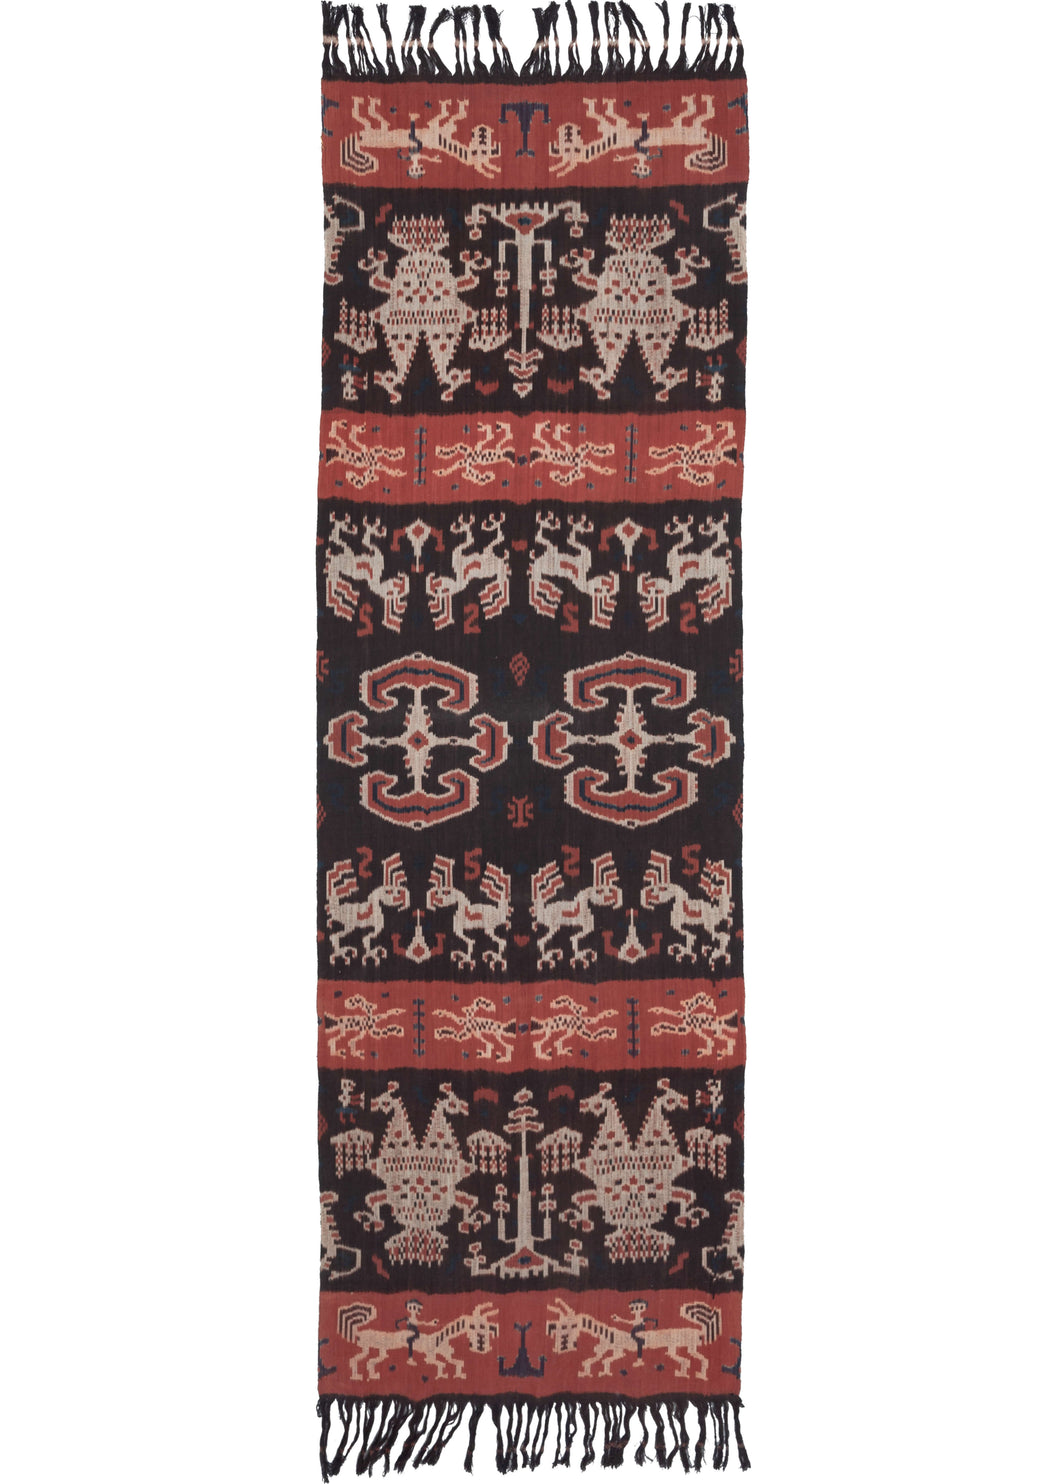 The design of this East Sumbanese Hinggi Kombu ikat textile is a mirror image of itself, which can be read in both directions and from side to side. The central geometric motif is named habak, a common centre motif for ikats, and was once a symbol of royalty. The other figures are animals like horses and cockatoos, both commonly found animals in Sumbanese weaving.  